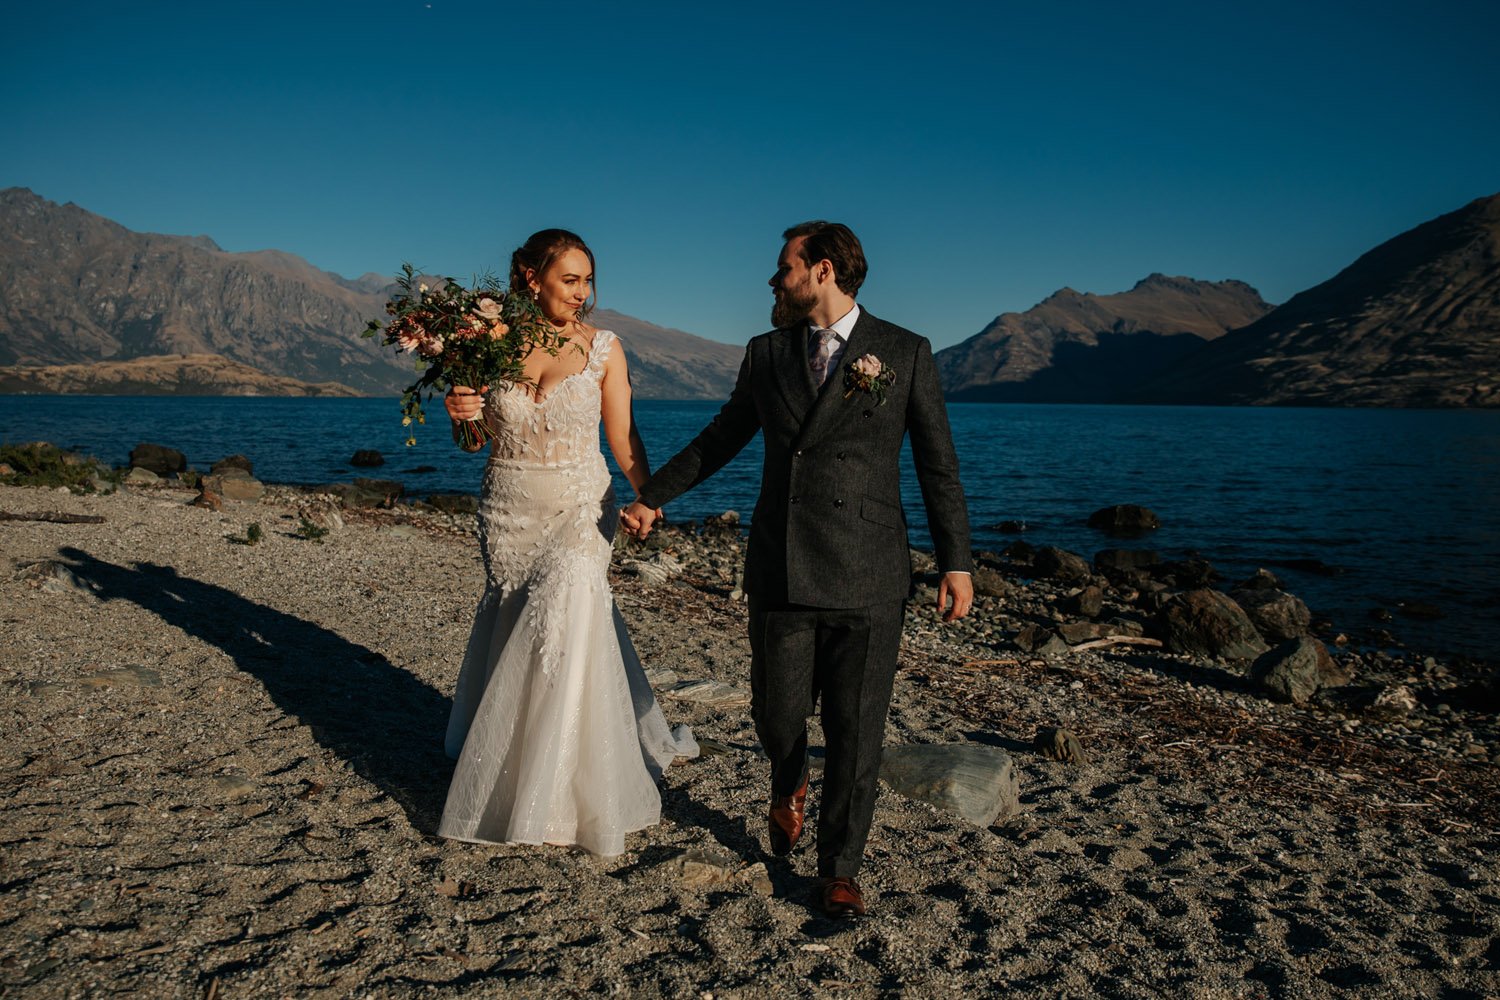 Autumn sunset wedding by the lake in Queenstown